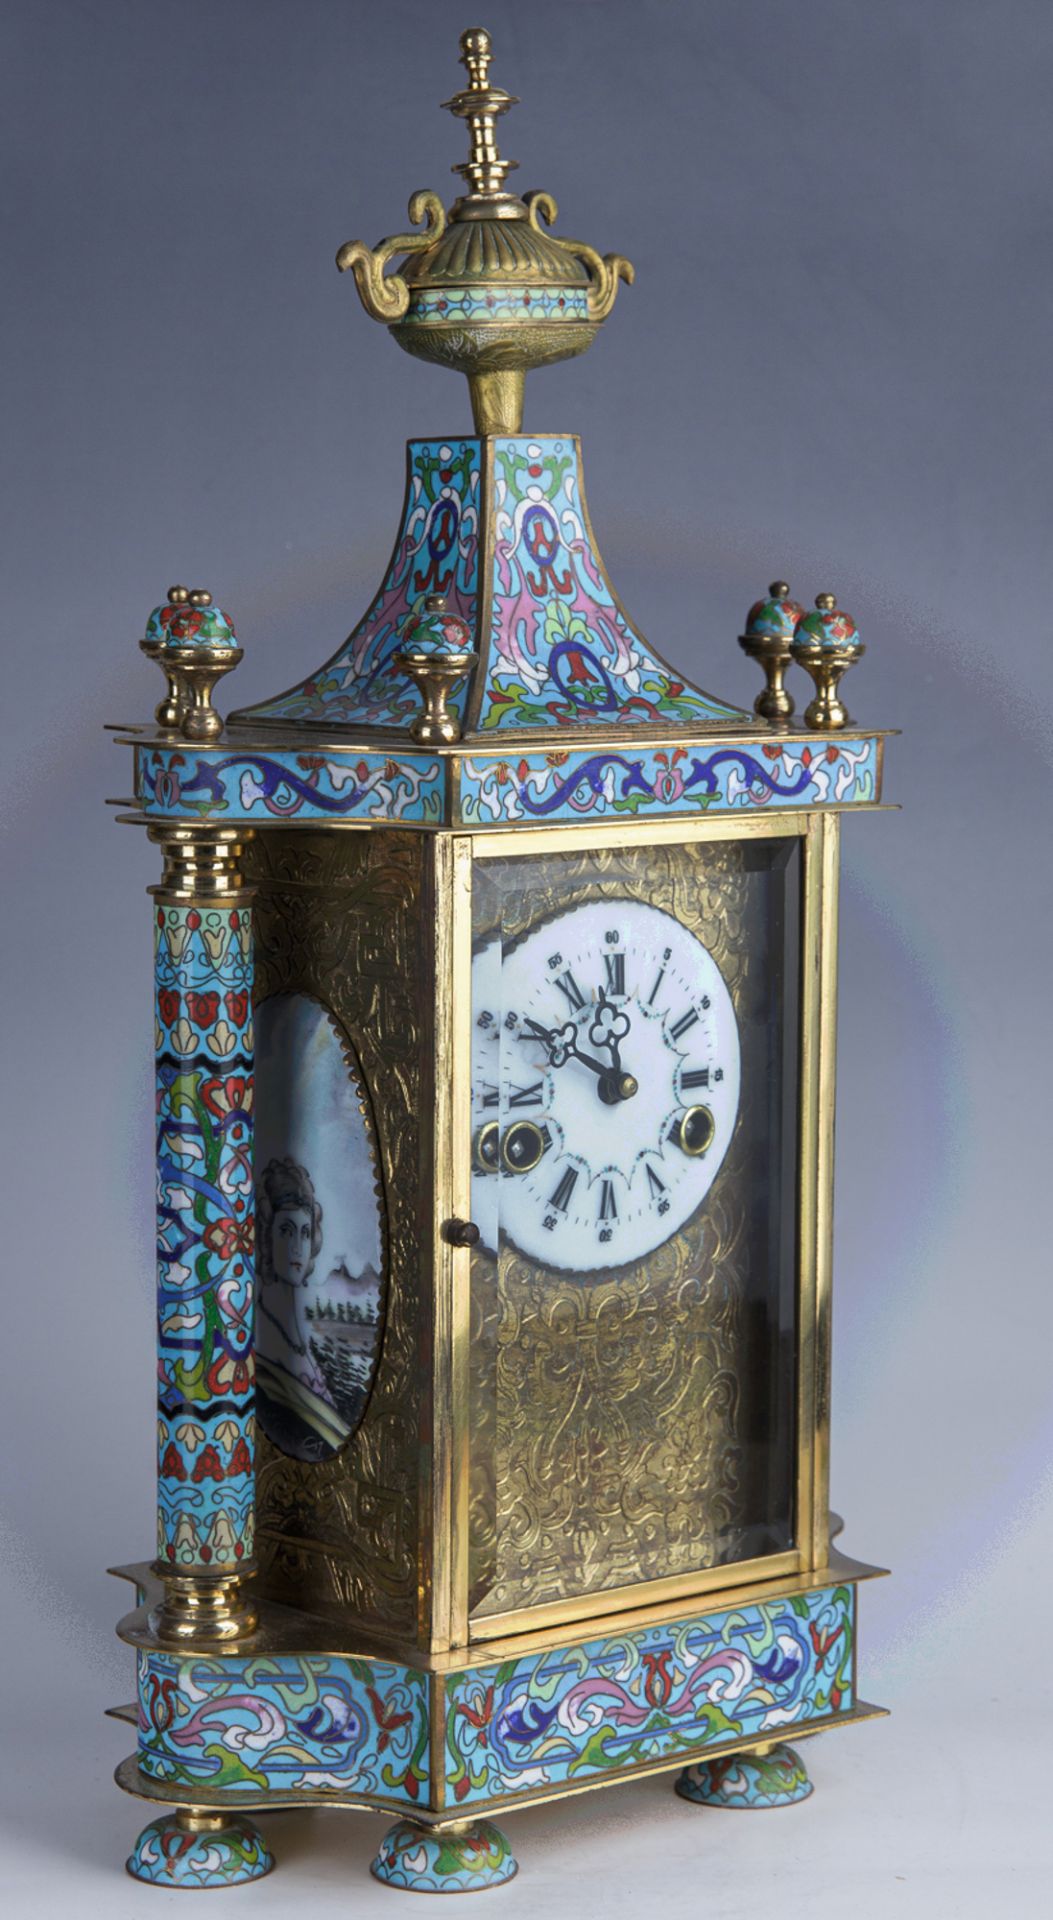 Cloisonné-Pendule mit Emailmalerei, China, 20. Jh. - Image 2 of 7